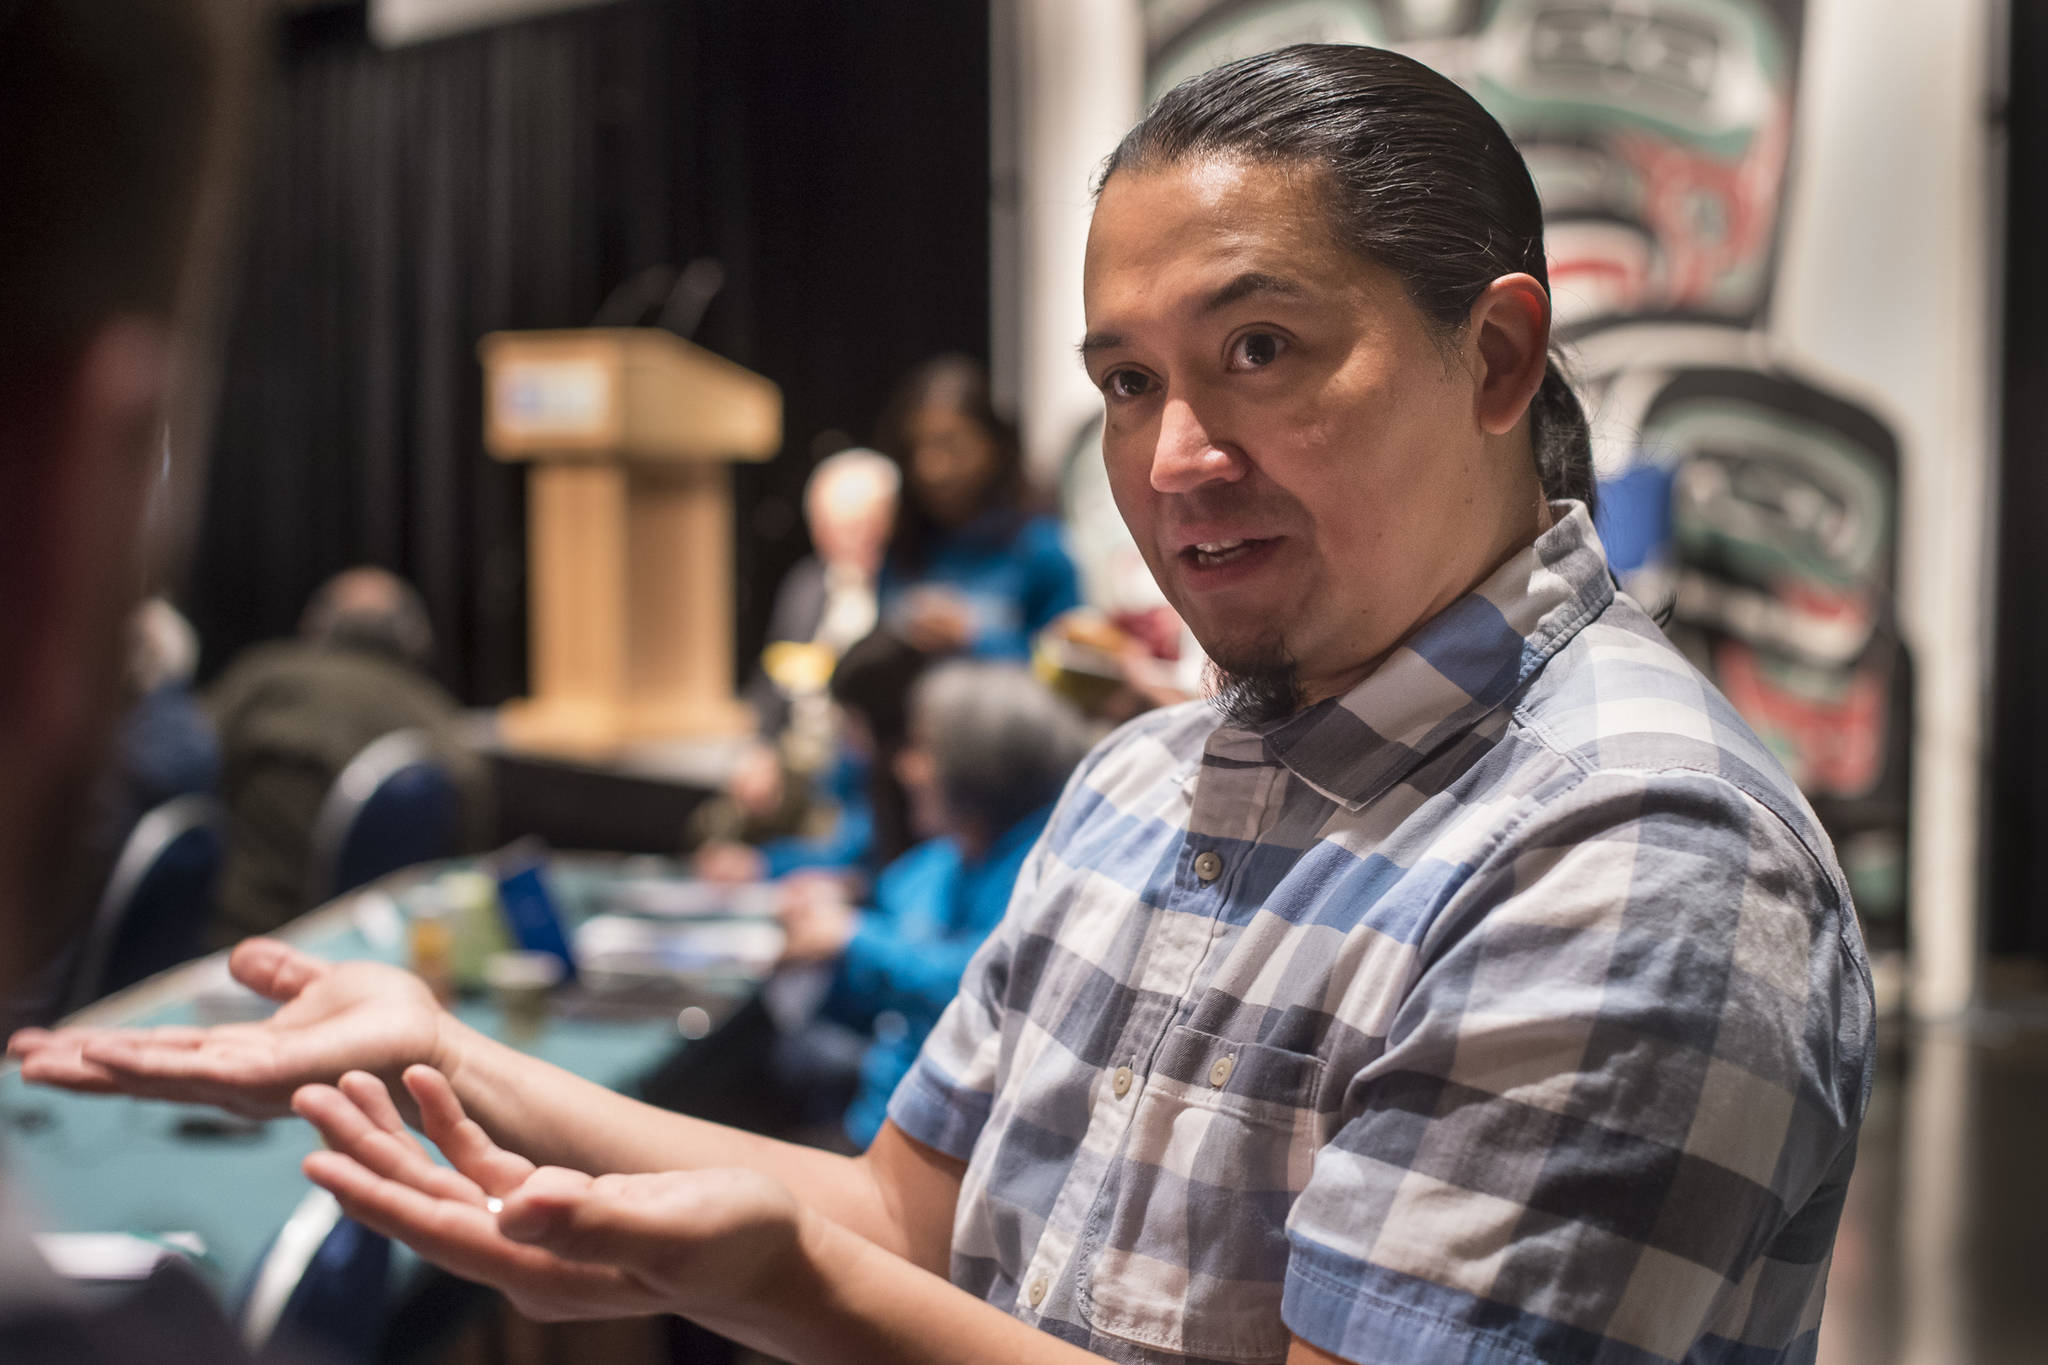 Cellphone, recess, cray cray: How Tlingit speakers are coining new words in an ancient language